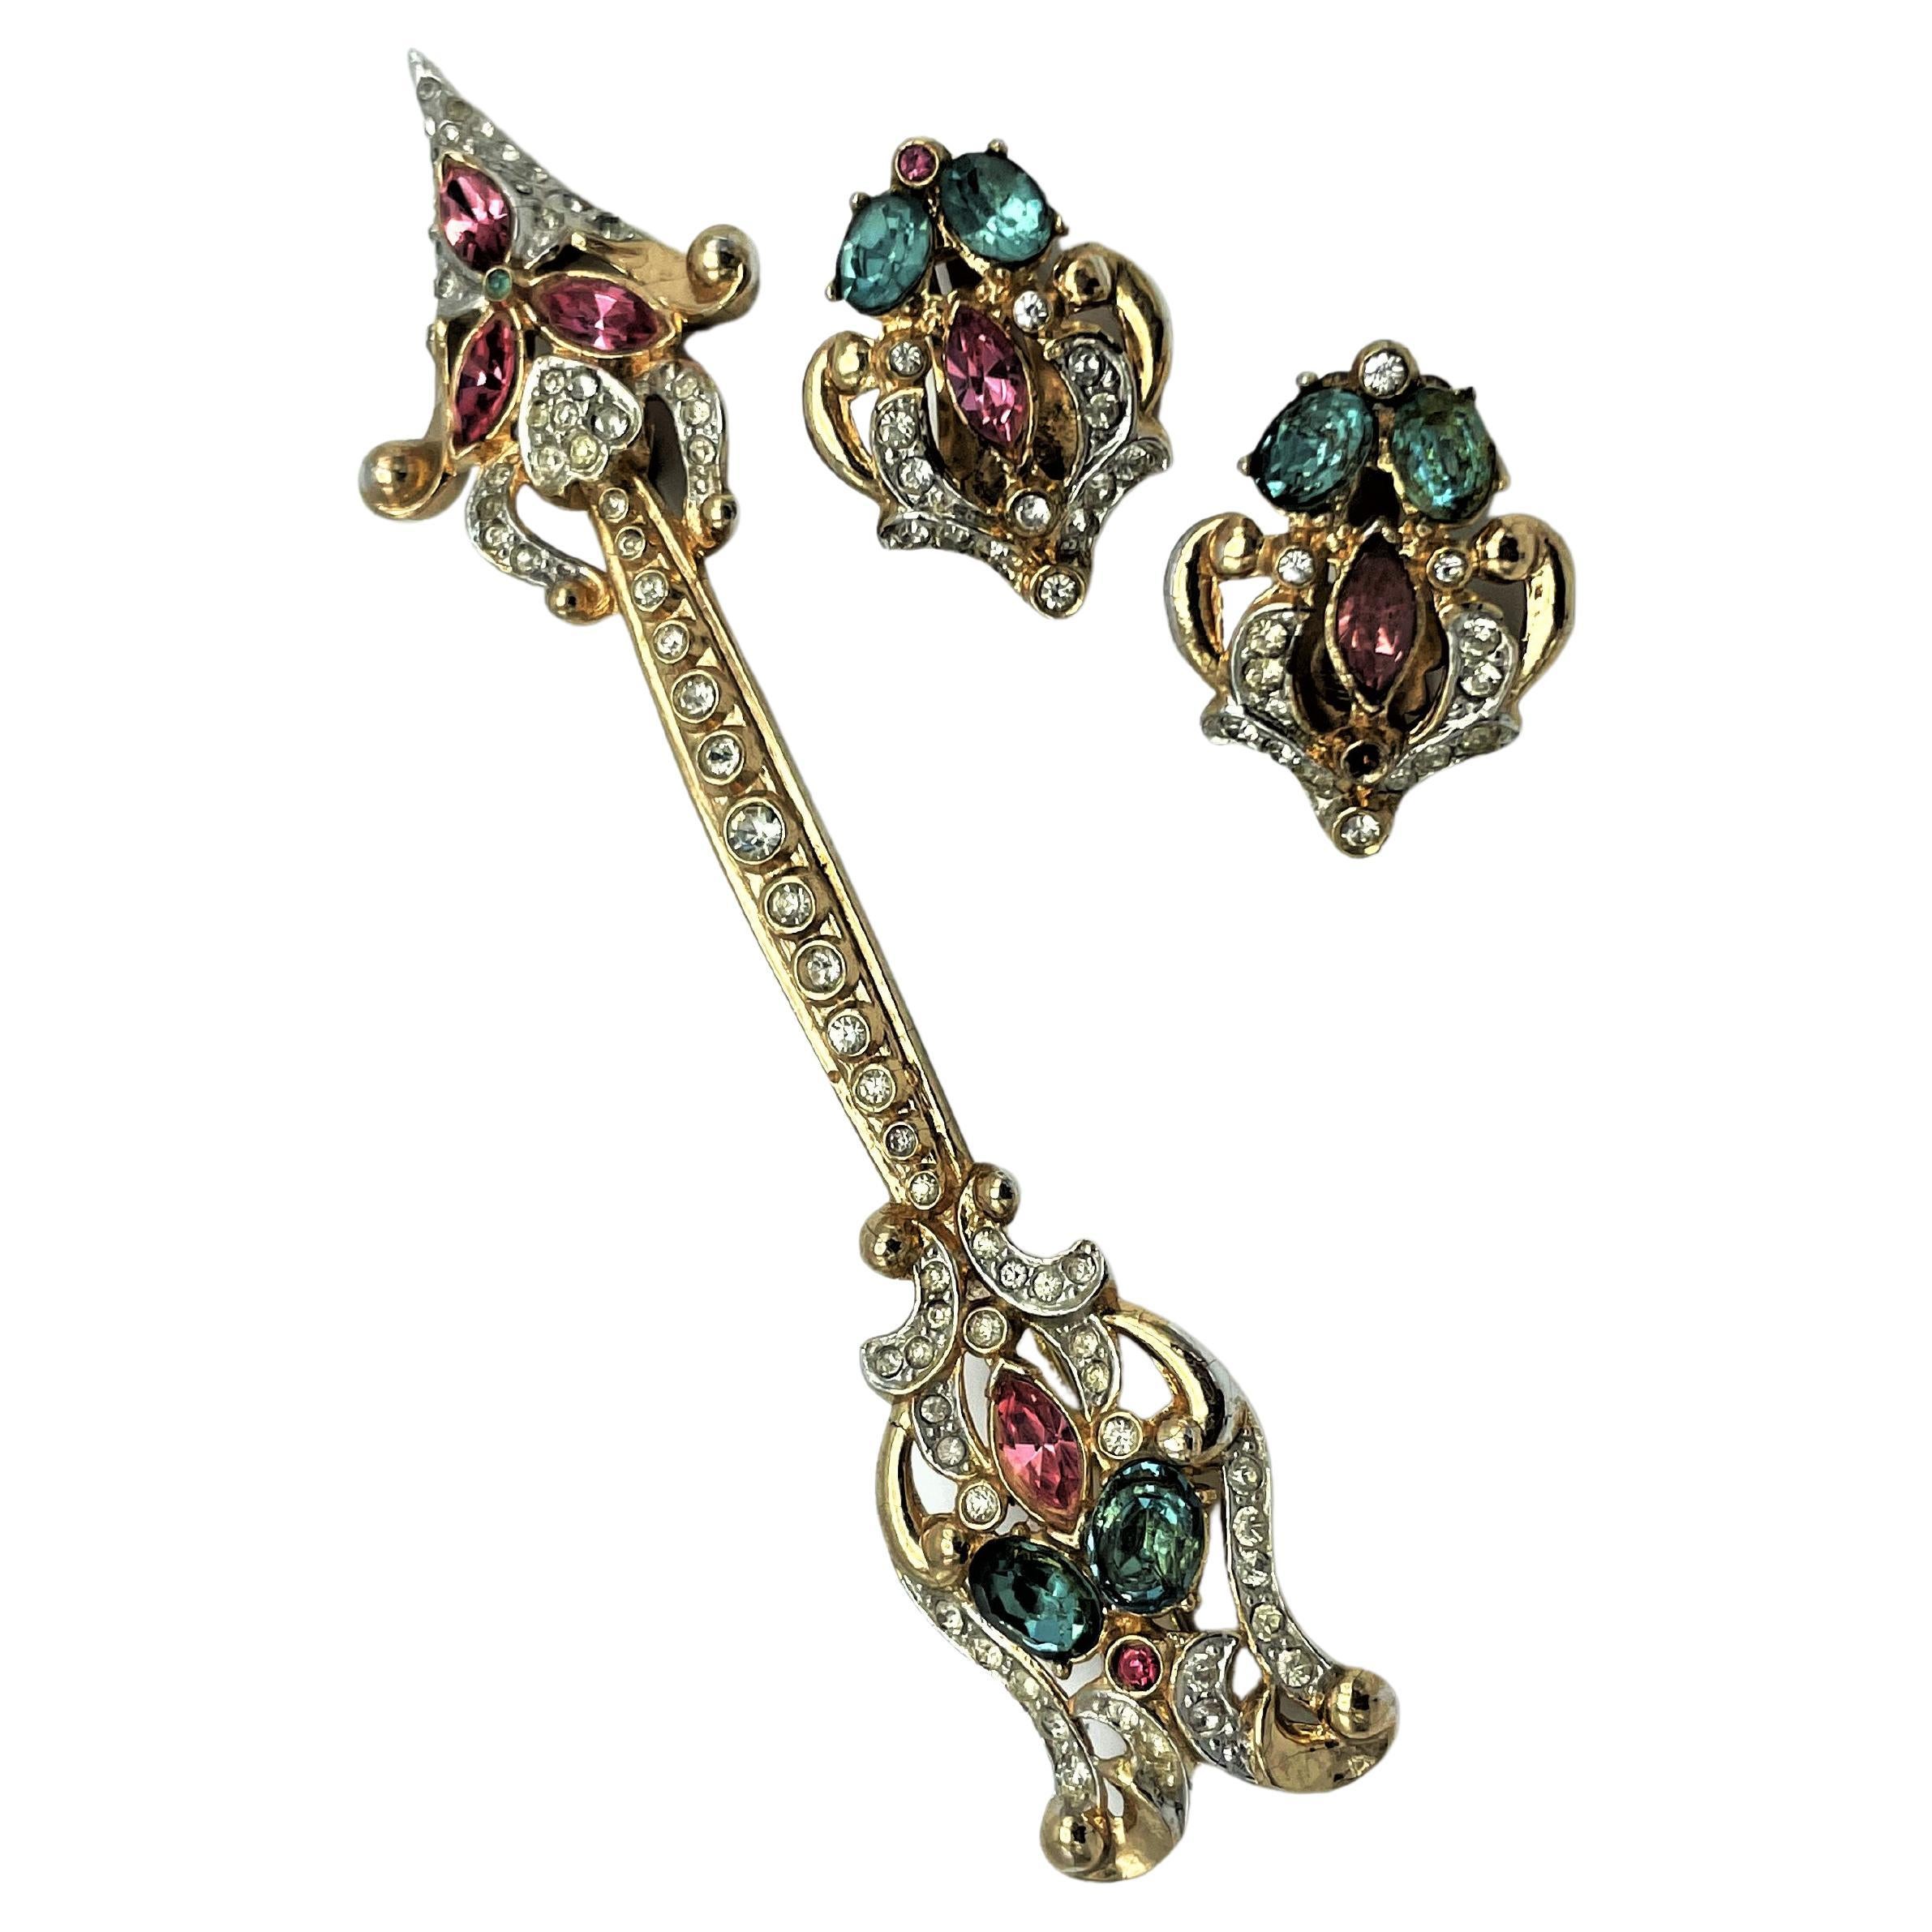 A feminine set, consisting of the whistle brooch with pink and light blue rhinestones, with matching ear clips, designed by CORO USA.  
MARKS OF QUALITY
For the most part, pieces marked 